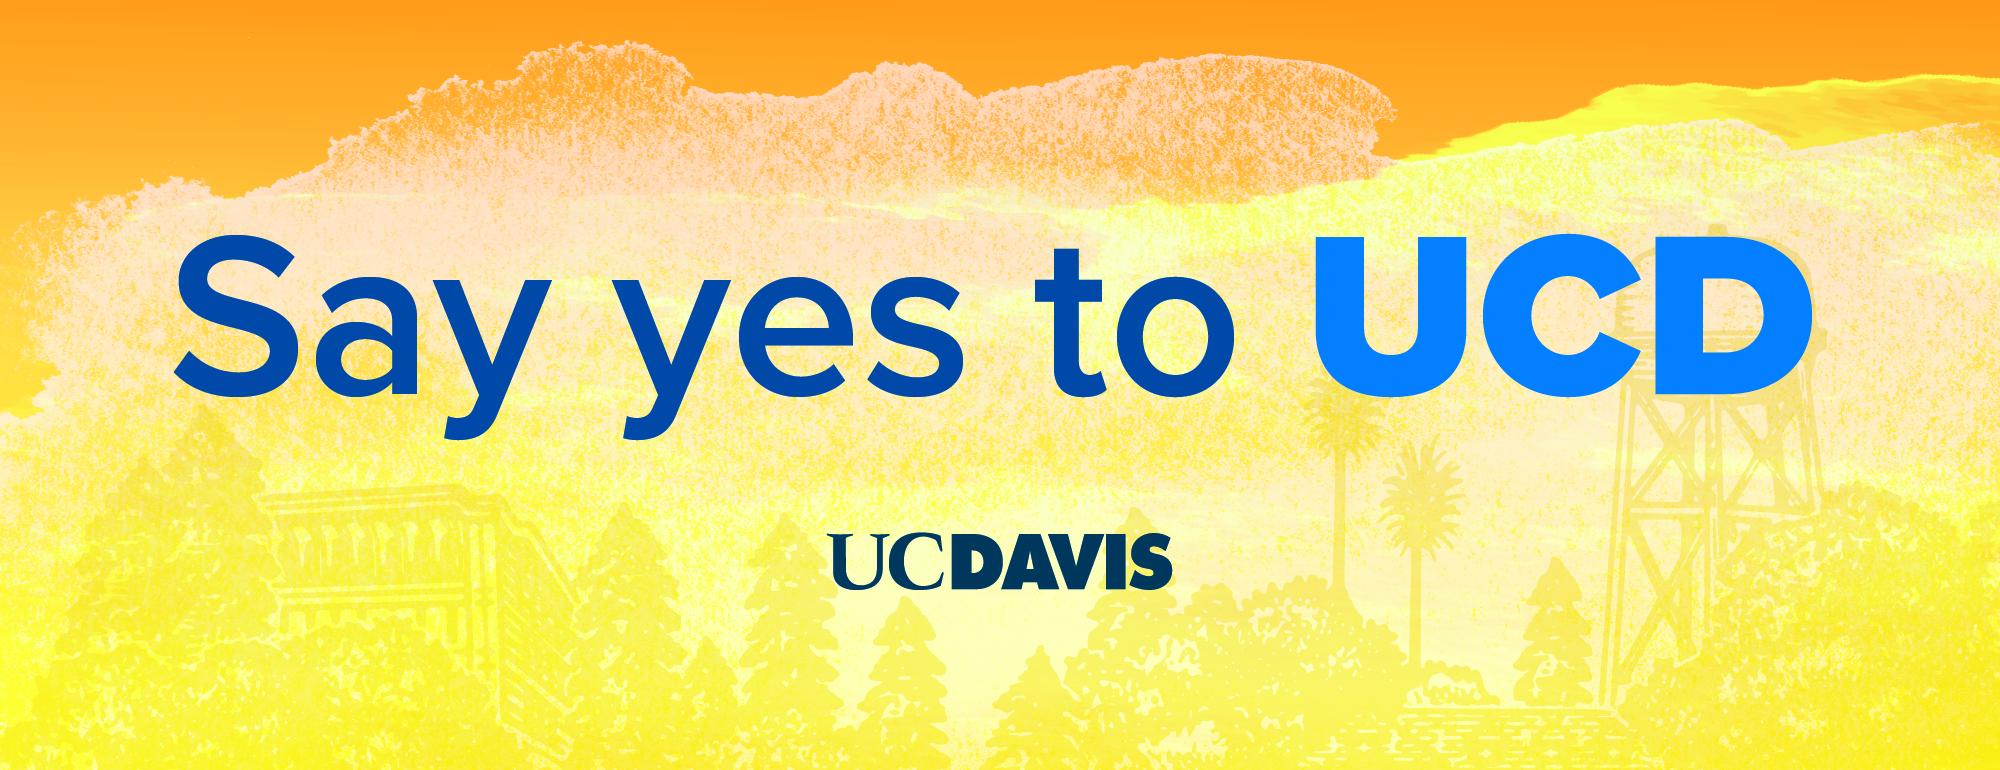 Say Yes to UC Davis graphic banner 